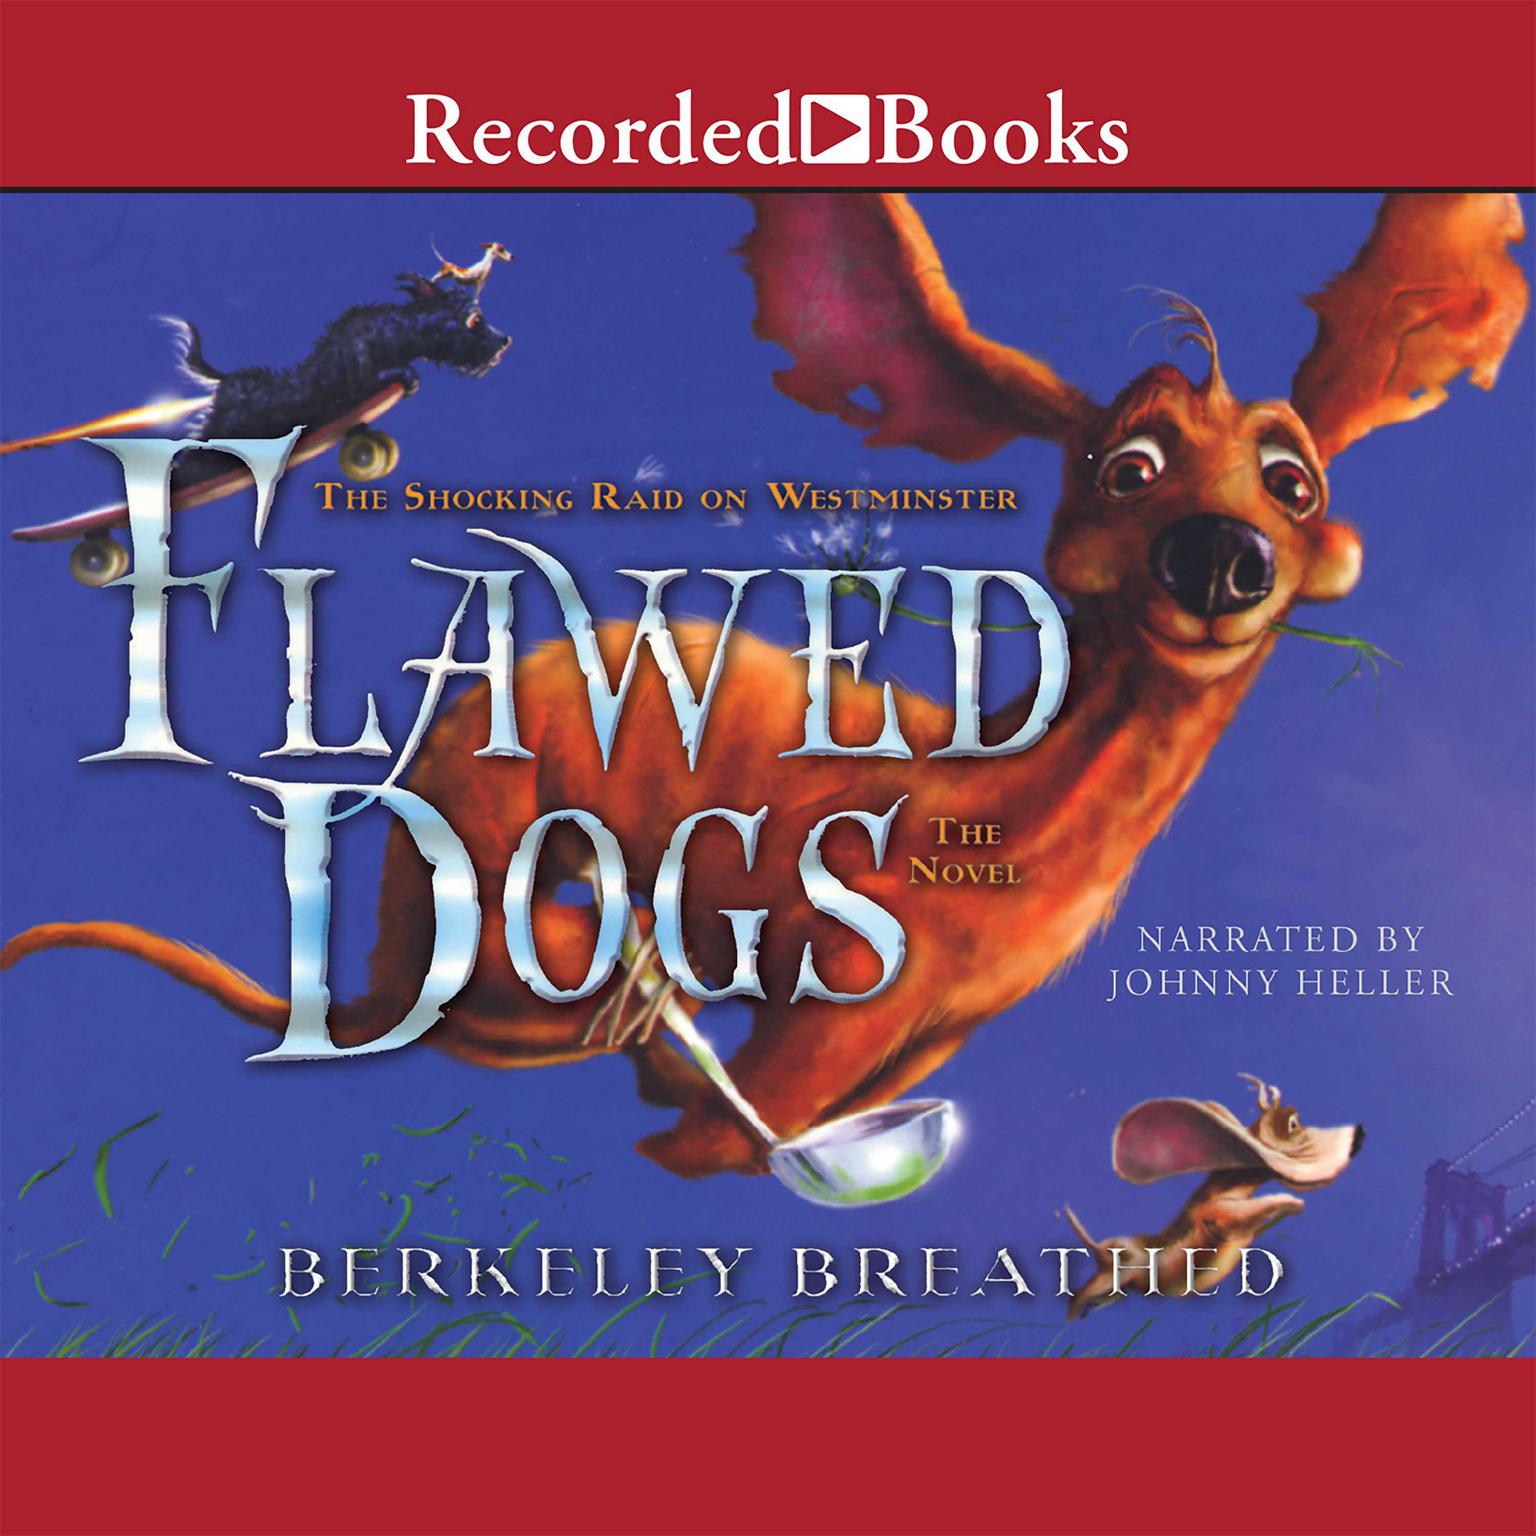 Flawed Dogs: The Novel: The Shocking Raid on Westminster Audiobook, by Berkeley Breathed